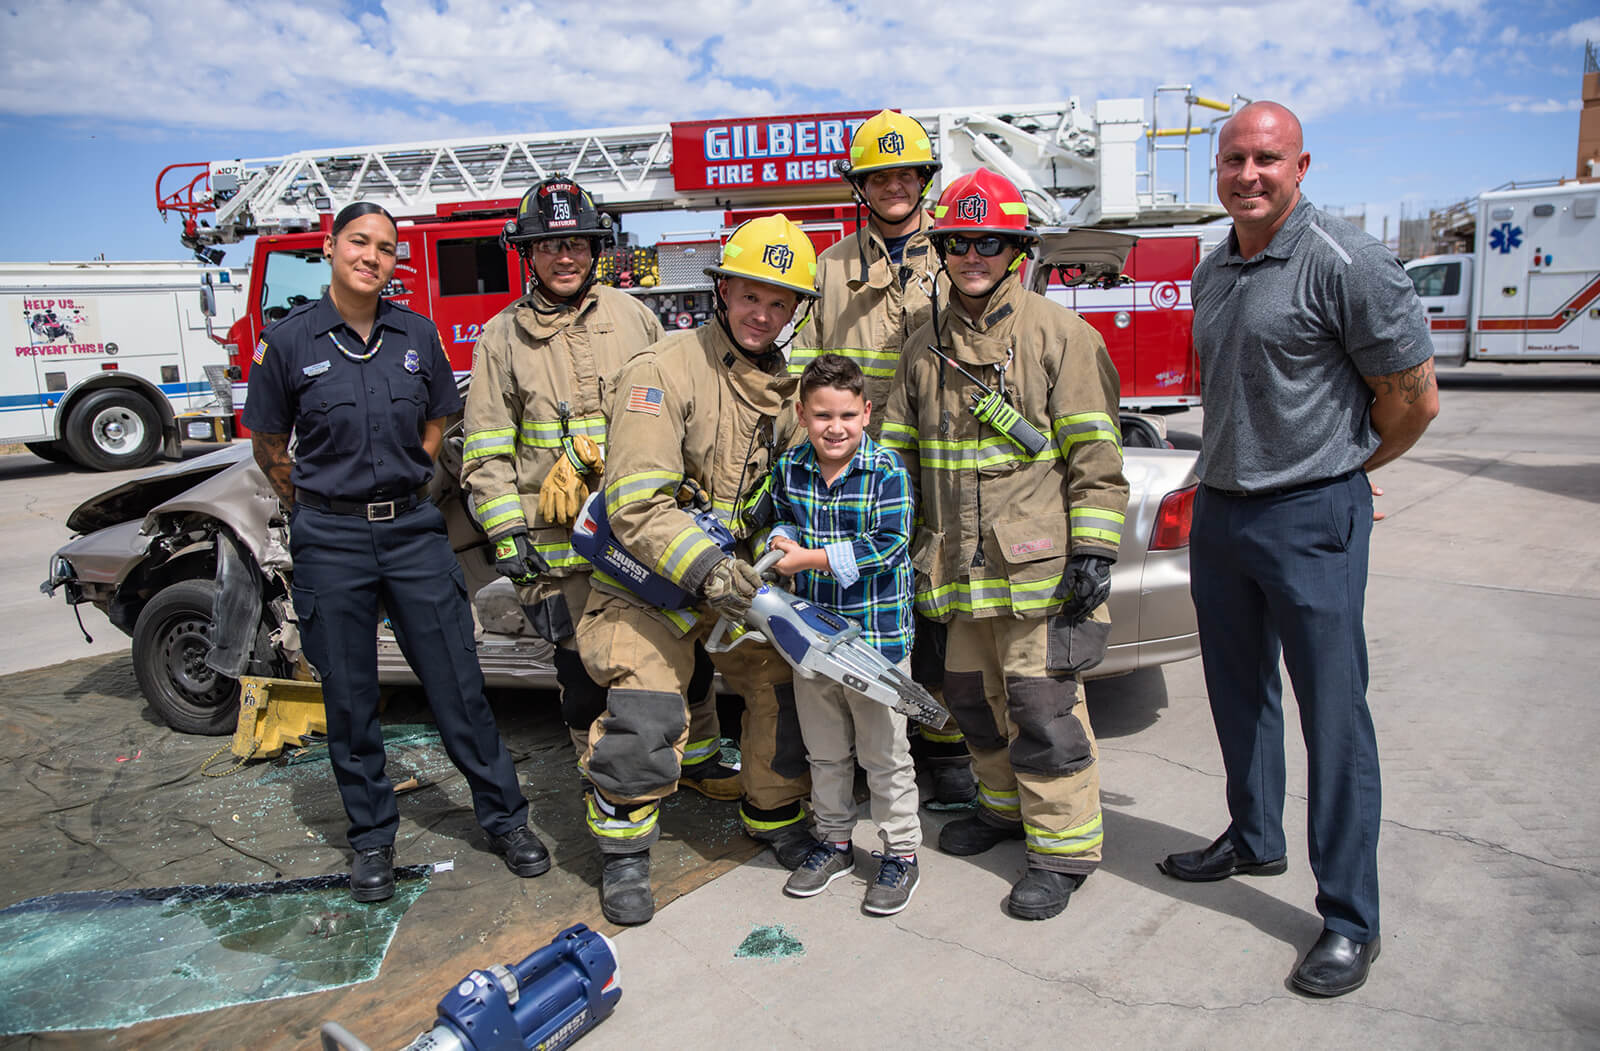 Simulated crash training crews with Glendale Fire paramedic Alex Matthews (left), her son, Jamison (holding jaws-of-life device), and Mesa and Gilbert Fire crews. Alex and Jamison were in a motor vehicle accident in December 2012, where Alex used the EPIC-TBI prehospital care guidelines to help save the life of her son.